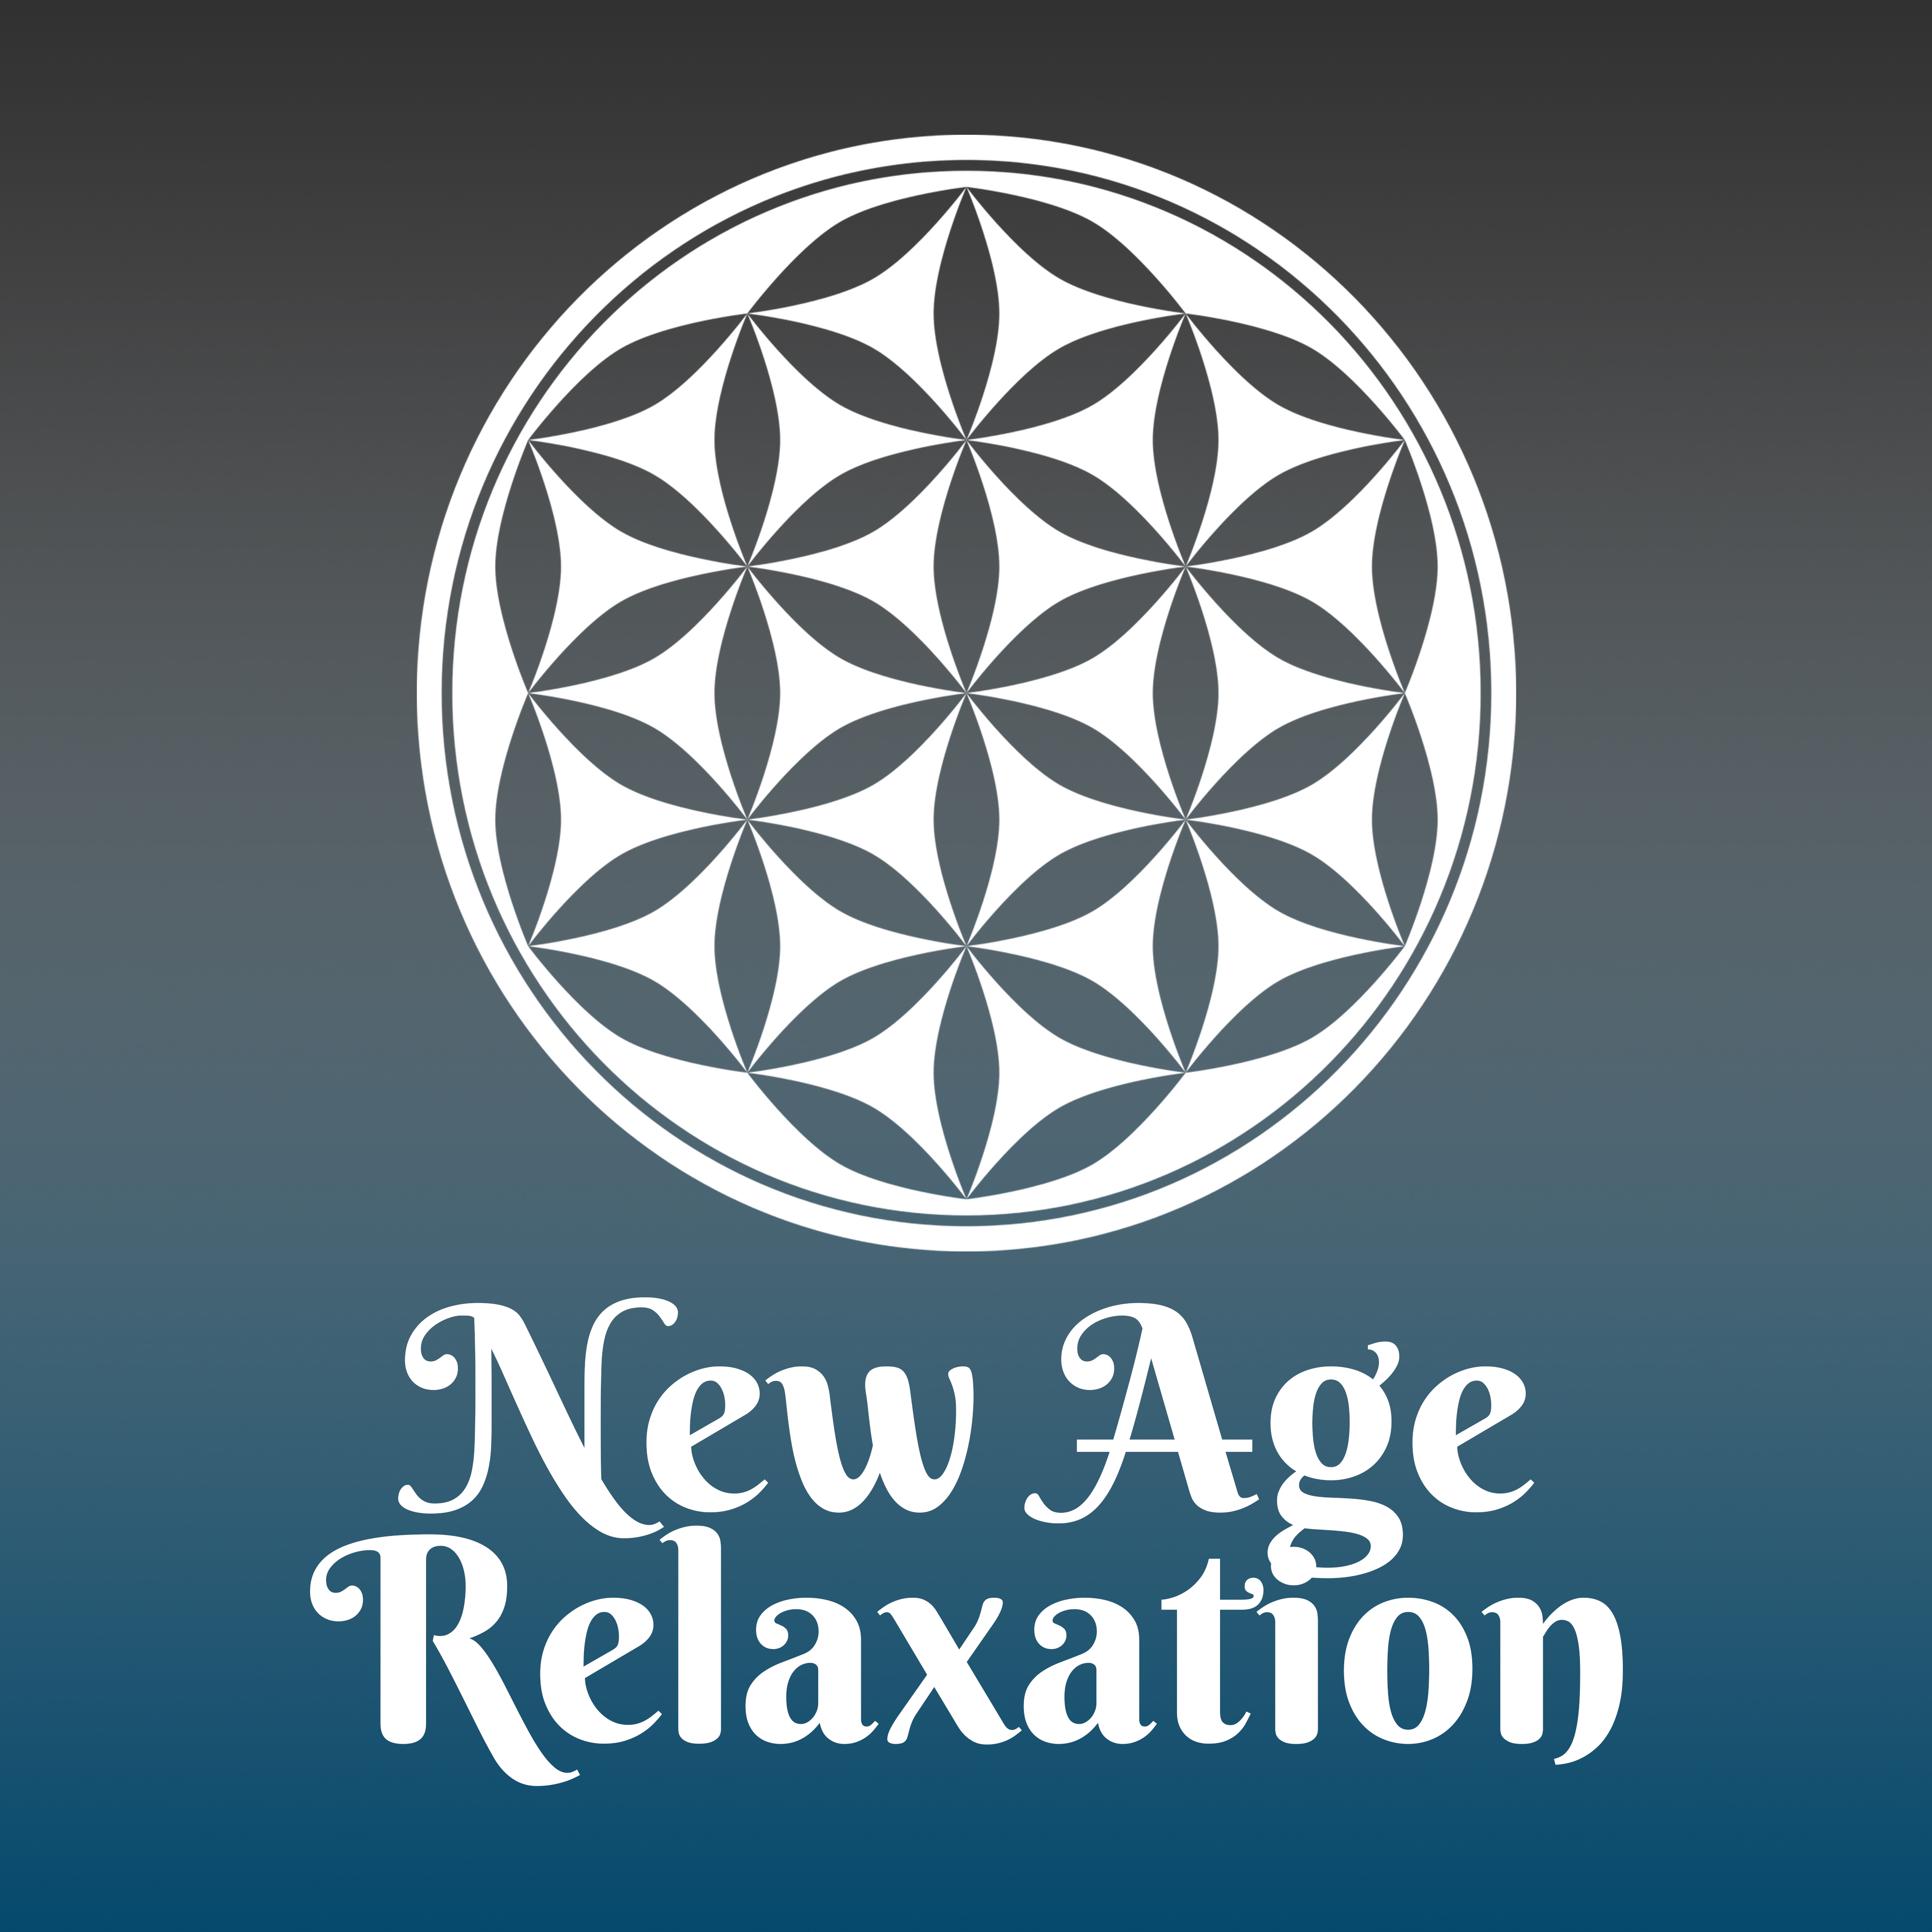 New Age Relaxation  Fresh New Age Album, Music for Relax Time, Rest, Reduce Anxiety  Relief Stress